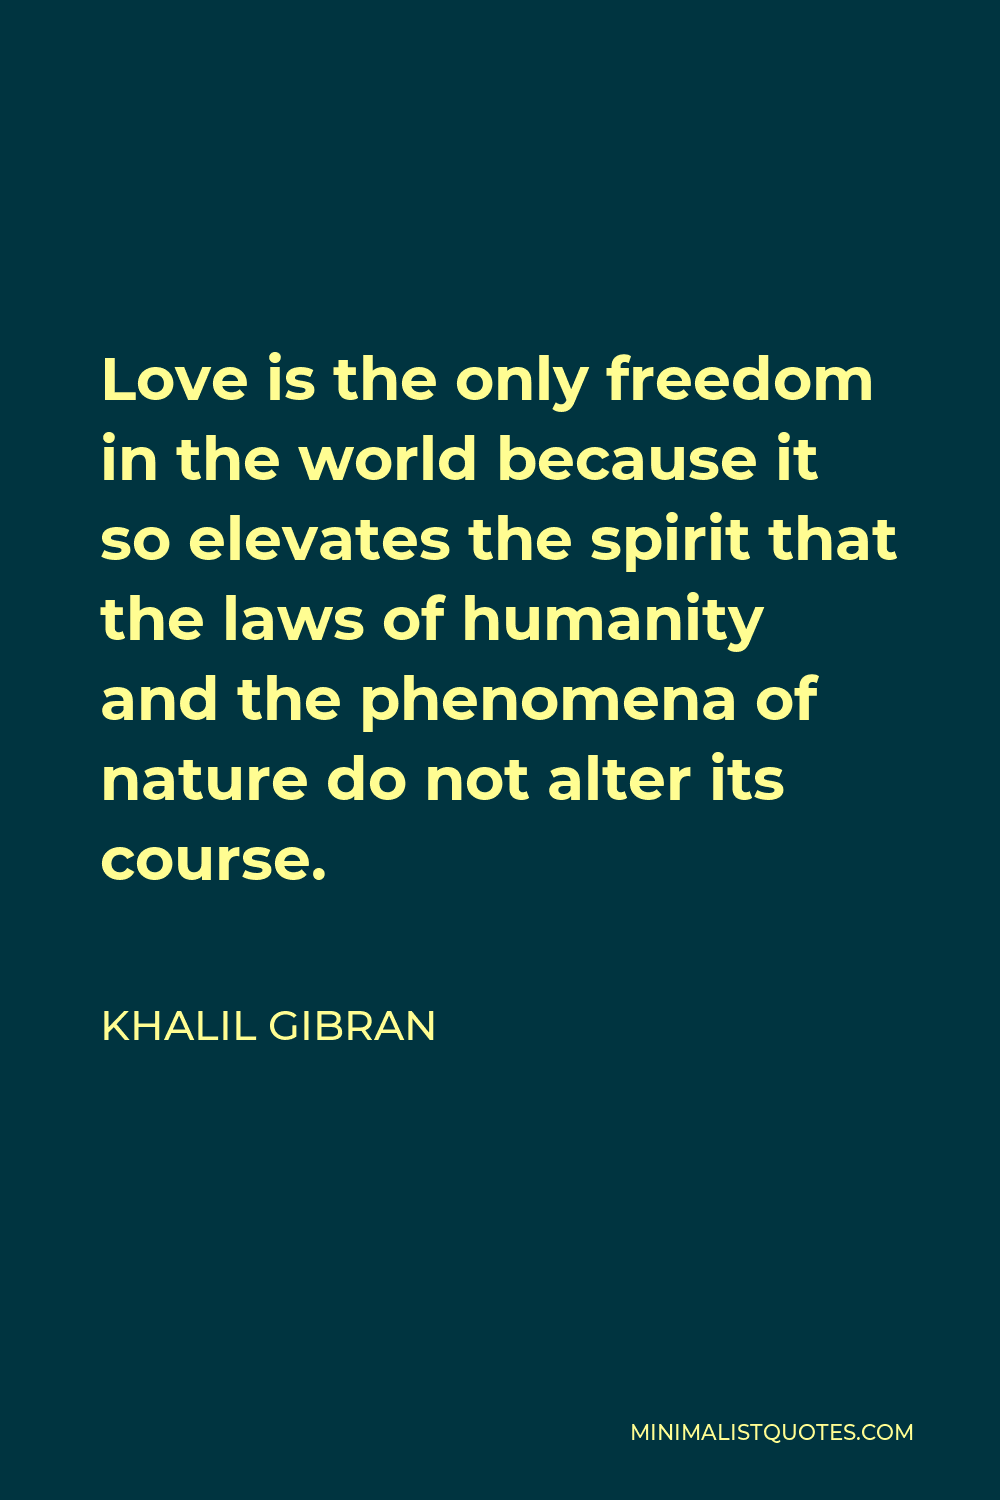 Khalil Gibran Quote - Love is the only freedom in the world because it so elevates the spirit that the laws of humanity and the phenomena of nature do not alter its course.